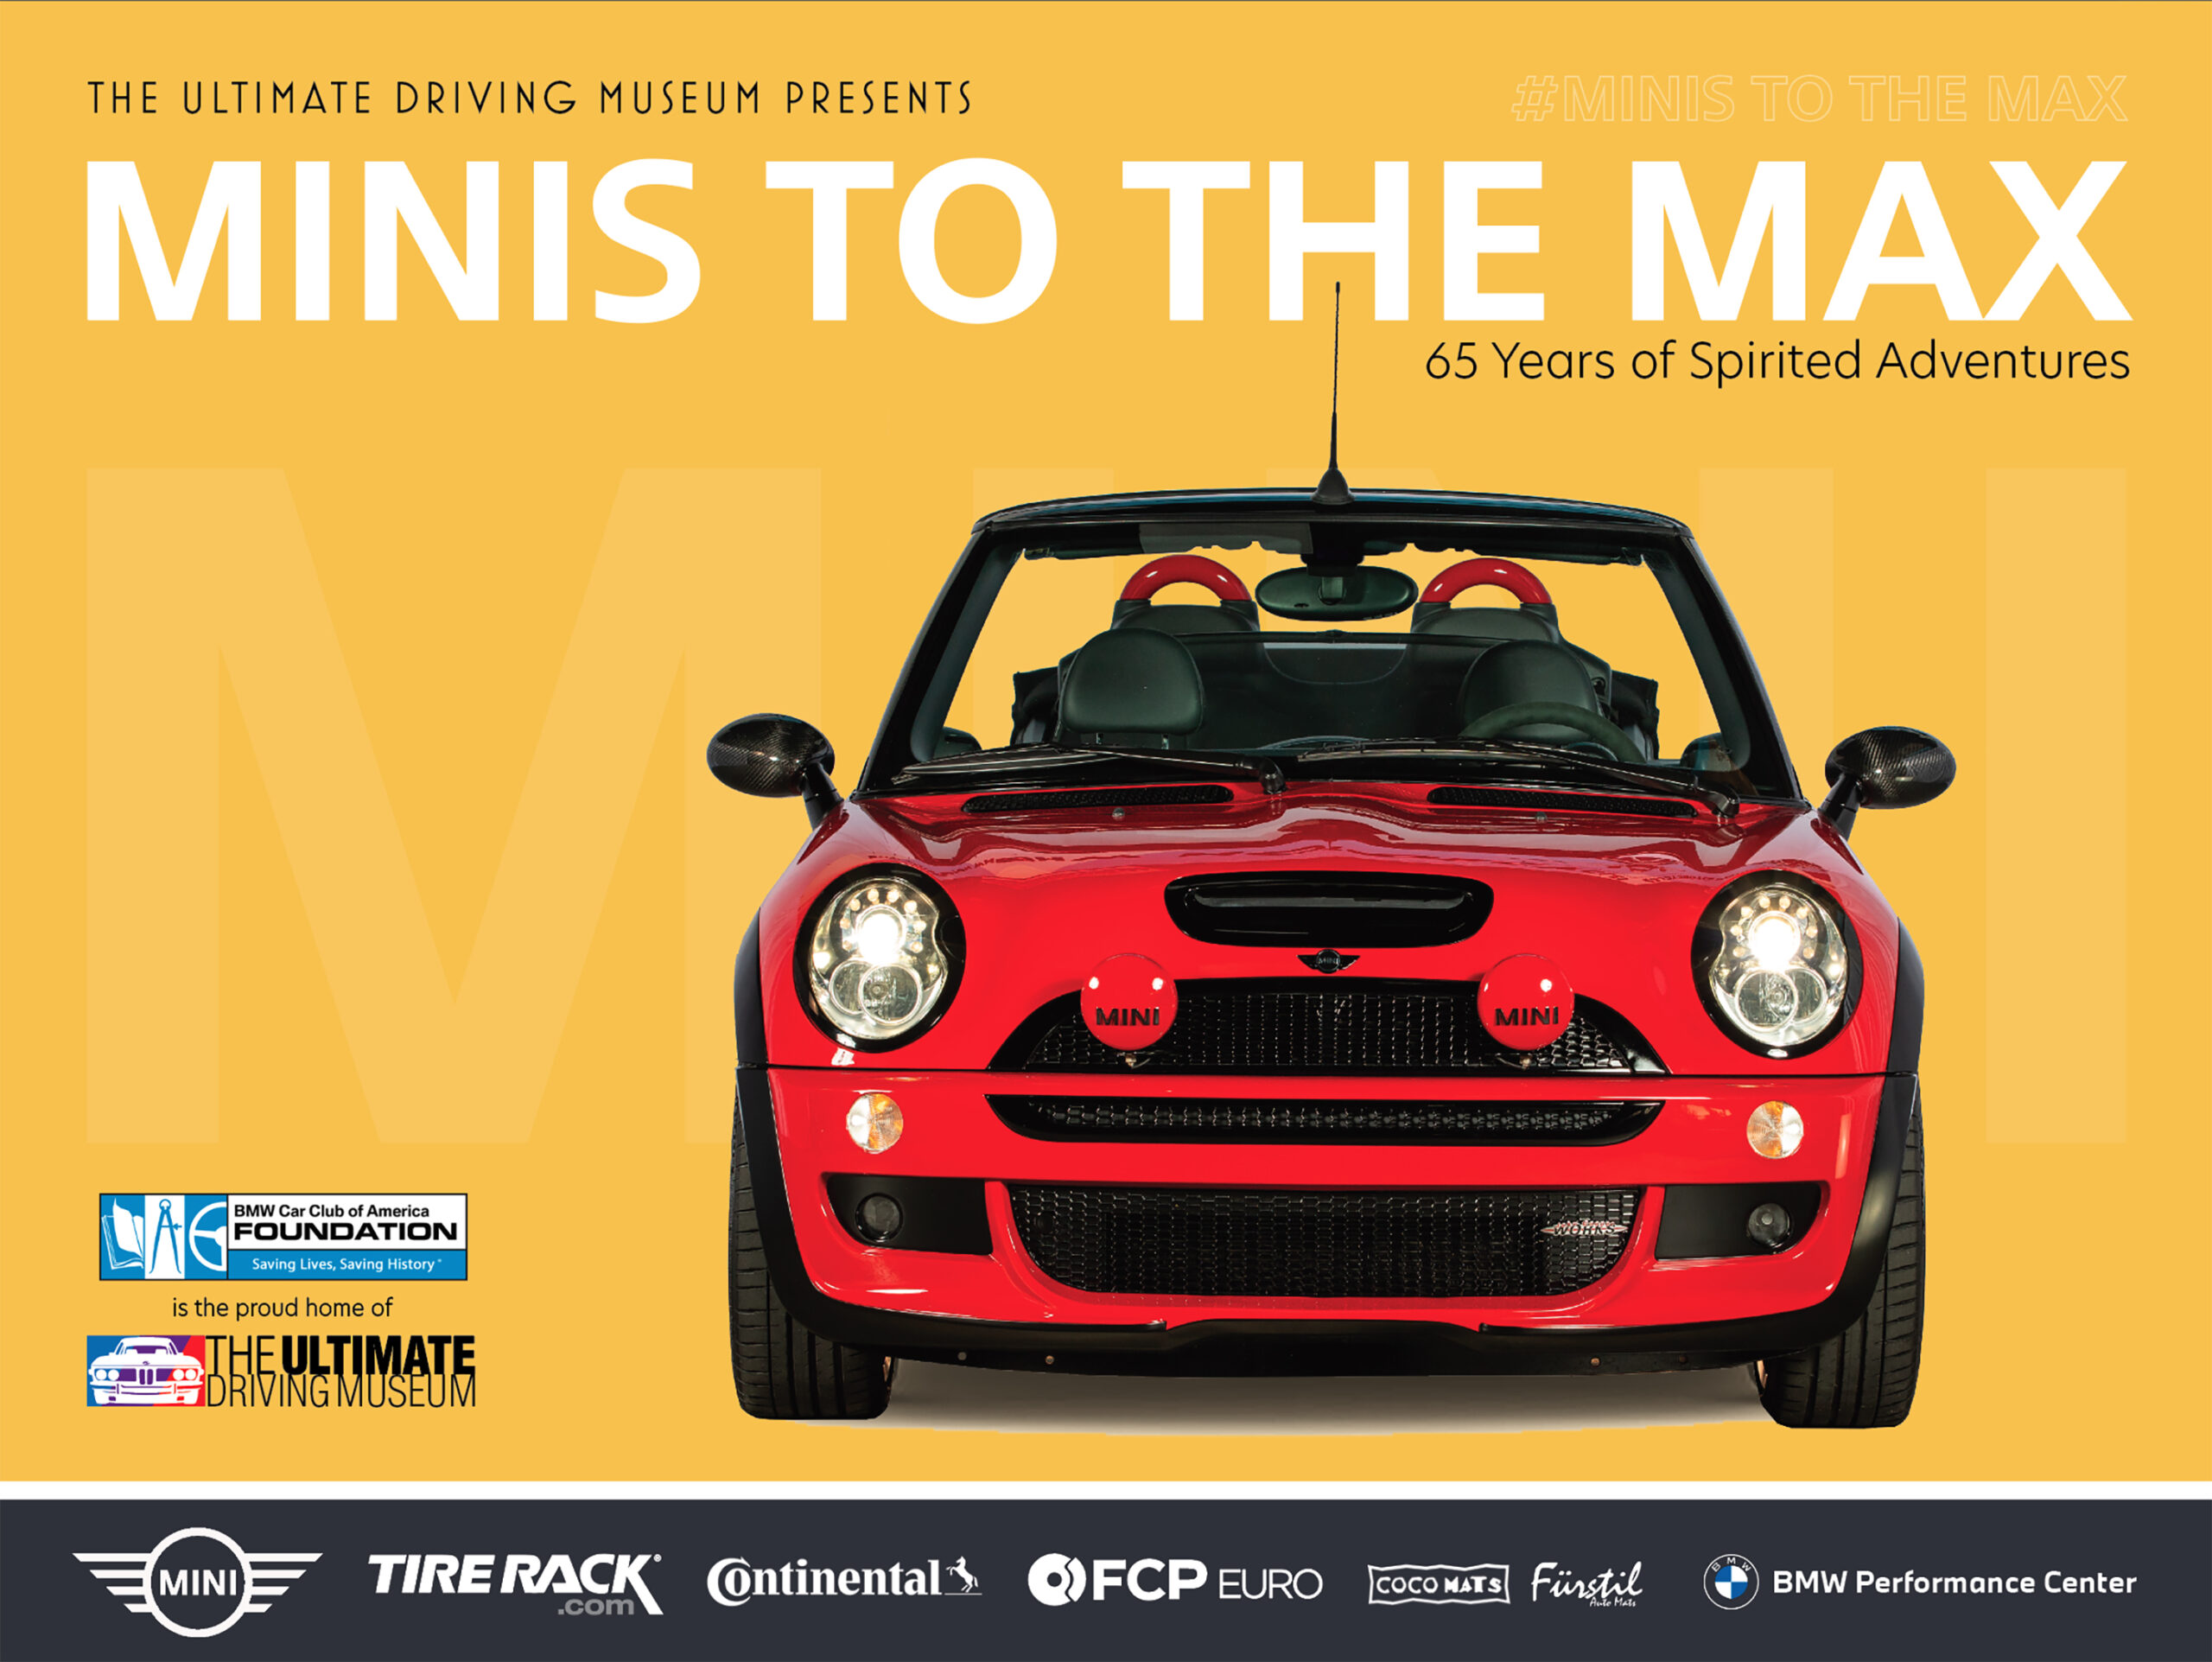 The Ultimate Driving Museum Announces MINIs To The Max Exhibit